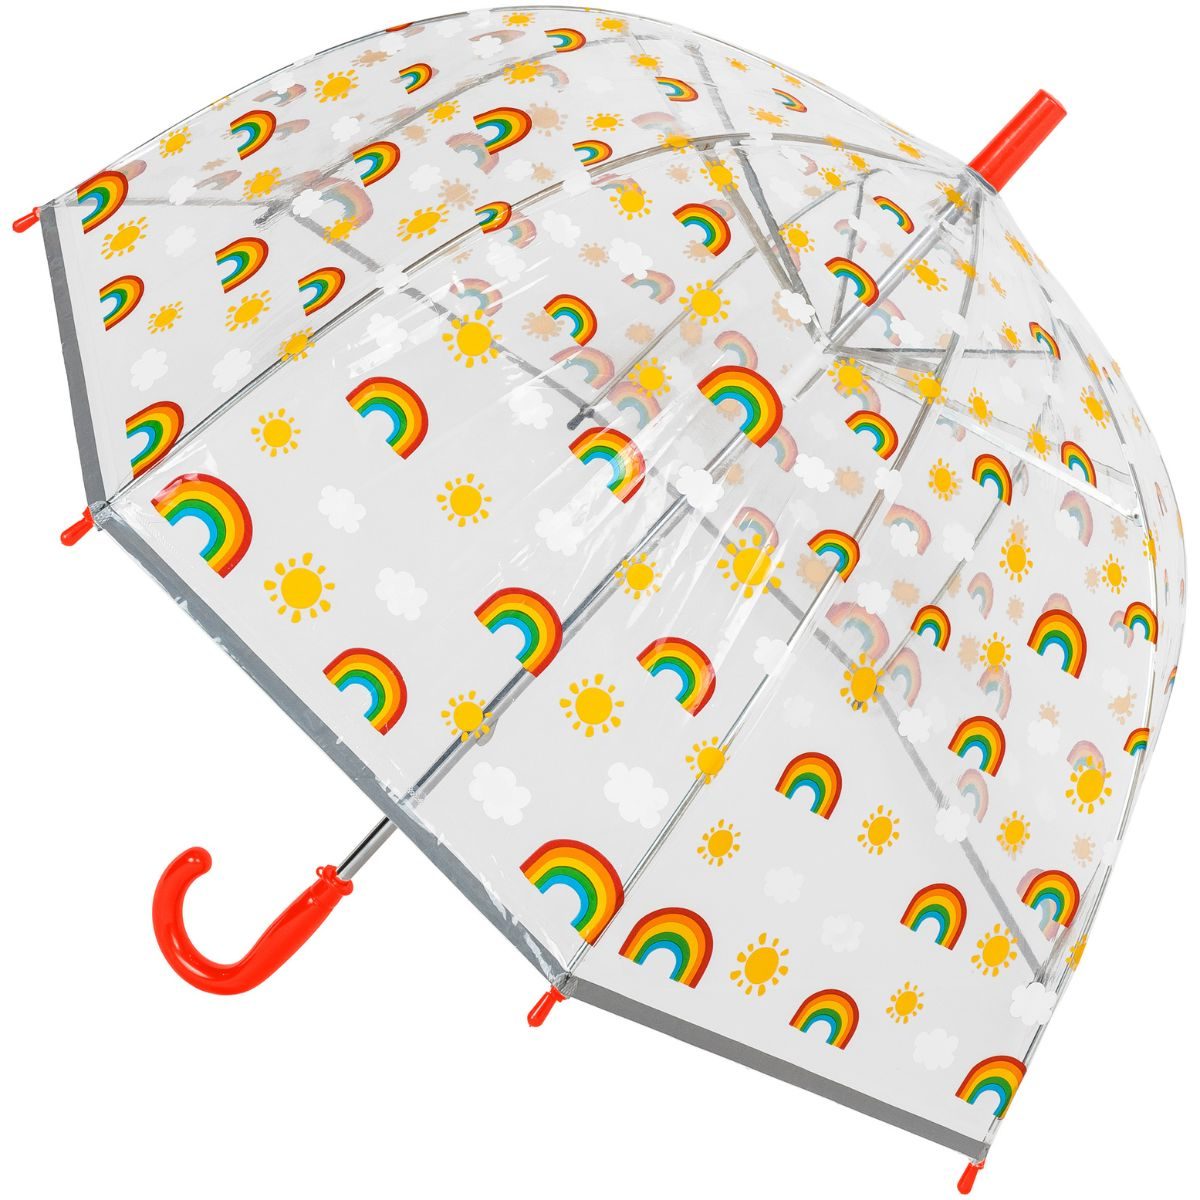 clear rainbow umbrella with red handle and tip